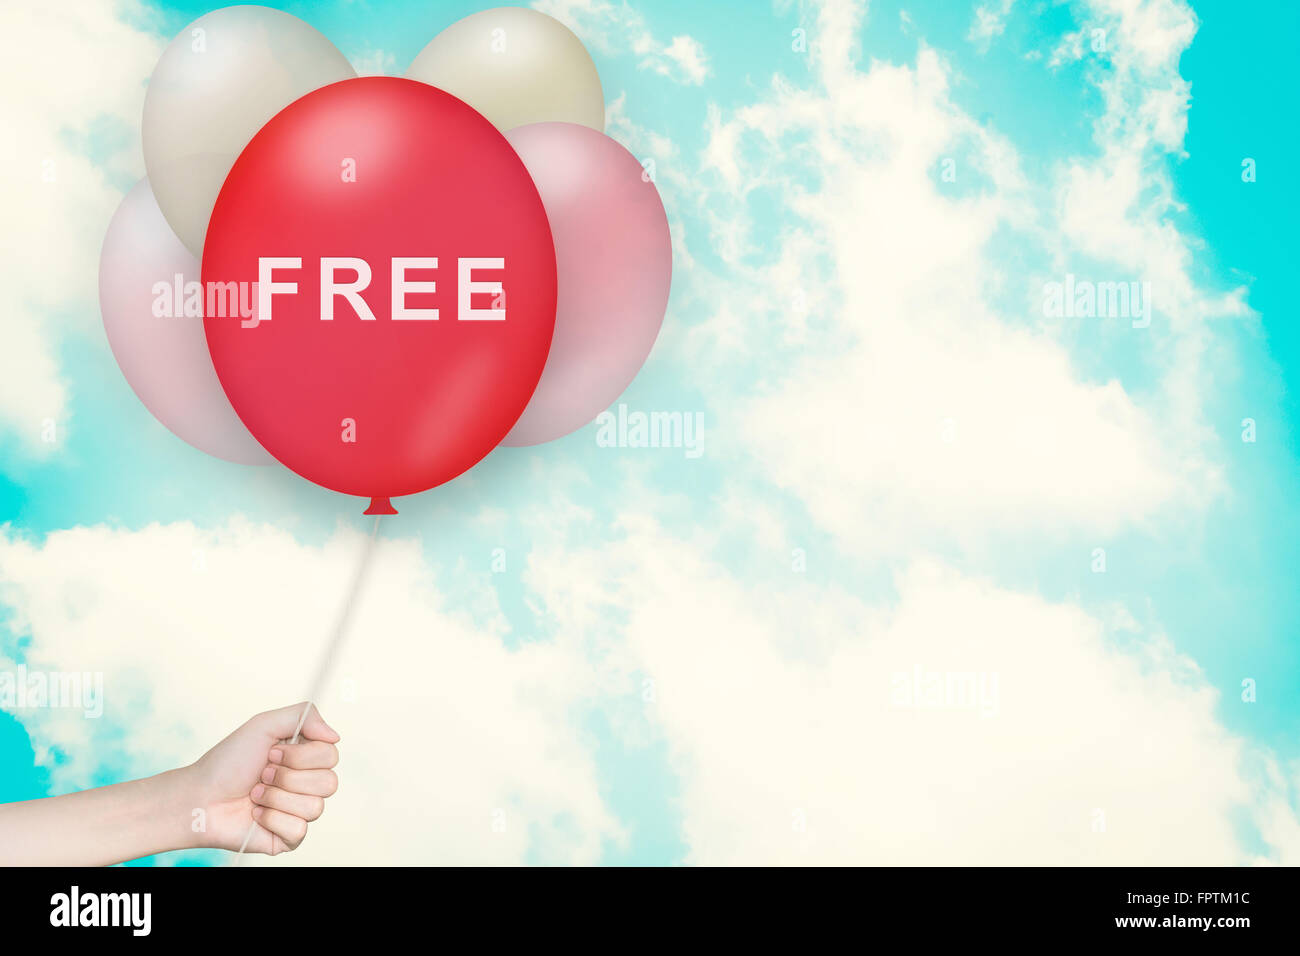 Hand Holding free Balloon with sky and vintage style Stock Photo